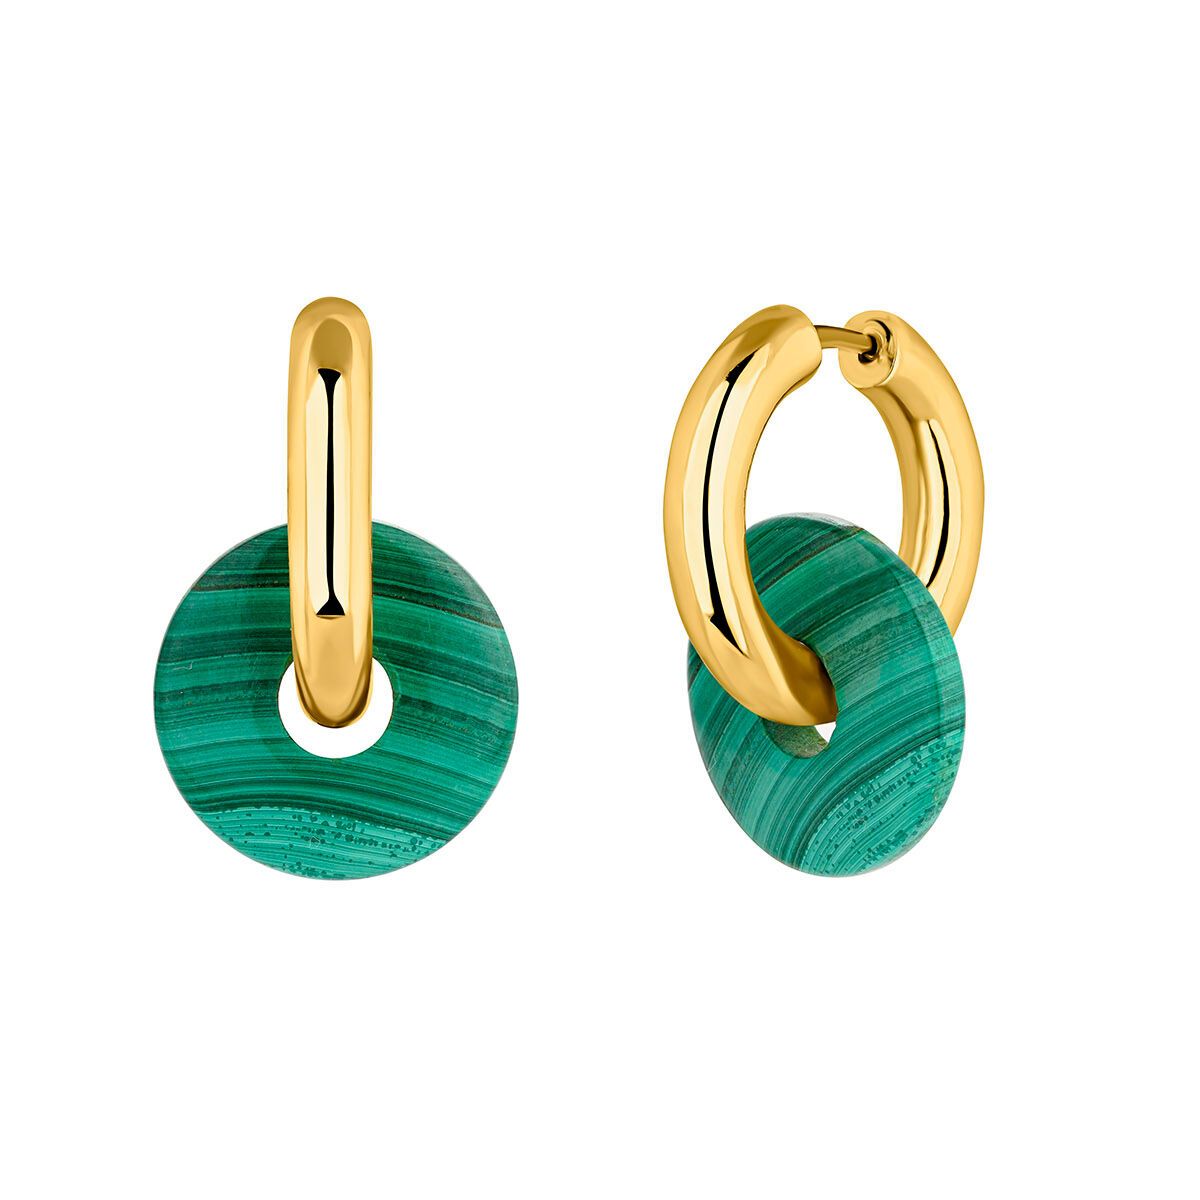 Medium hoop earrings in 18k yellow gold-plated silver with a green malachite stone, J04751-02-MA, hi-res